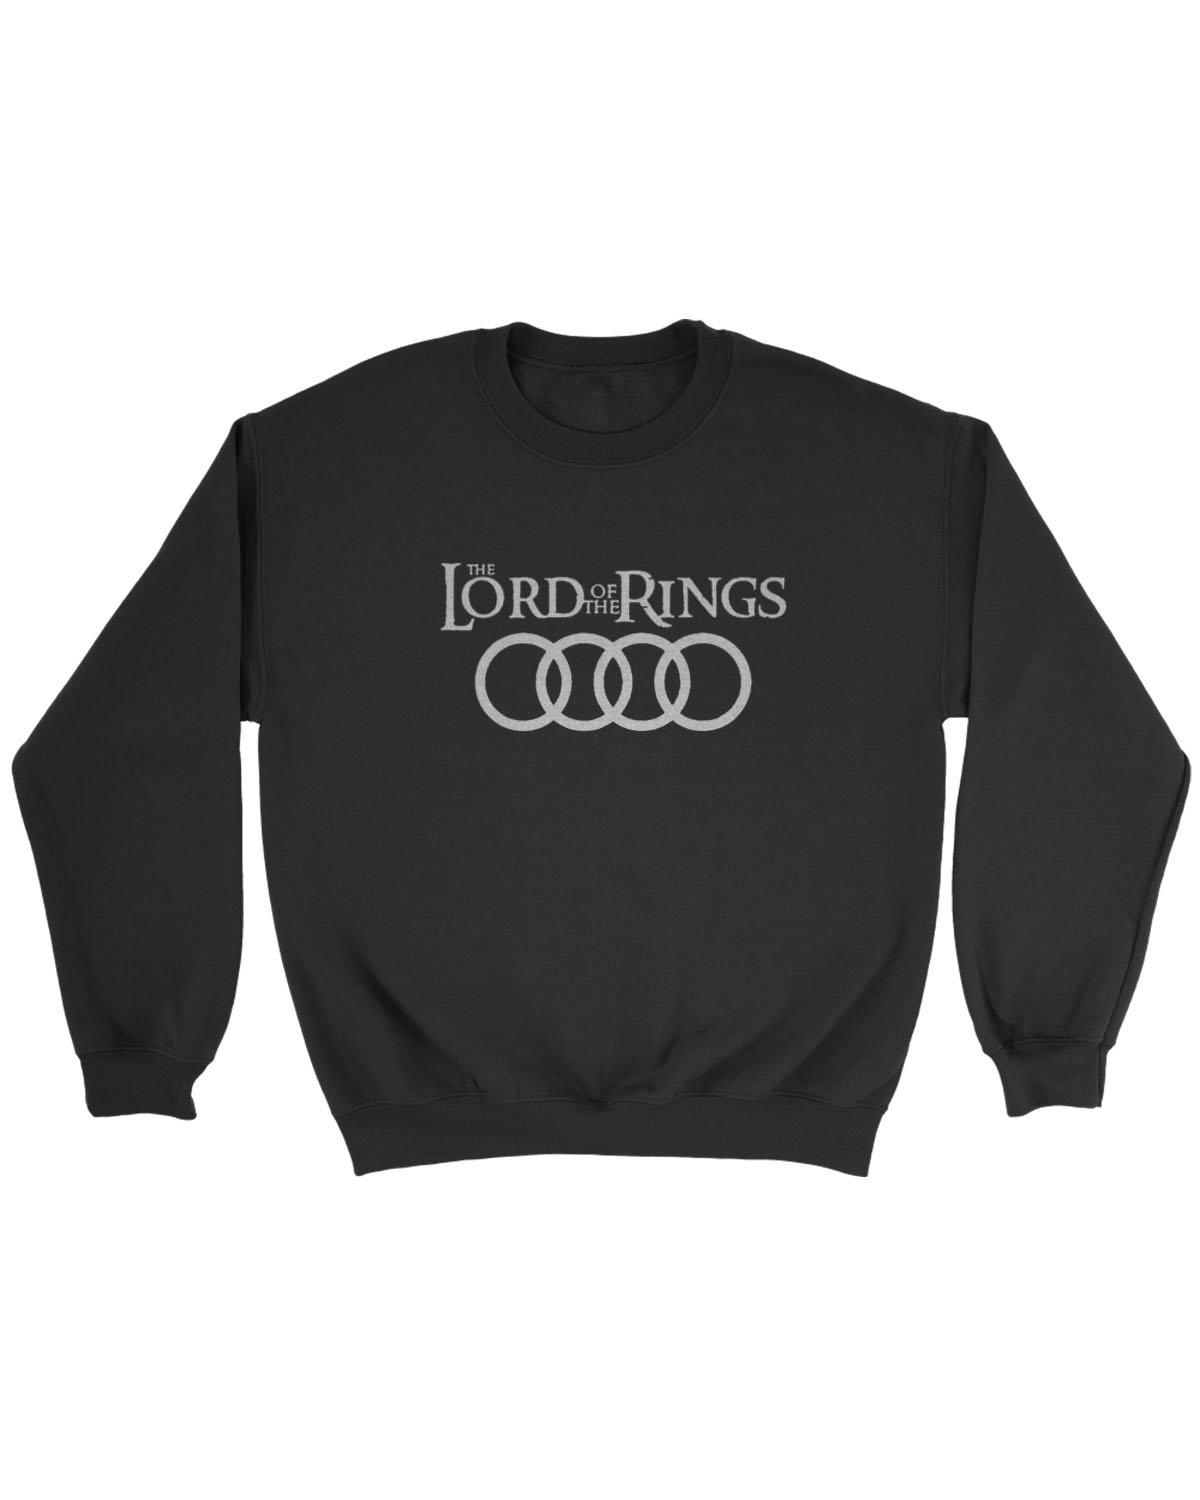 The Lord Of The Rings Sweatshirt